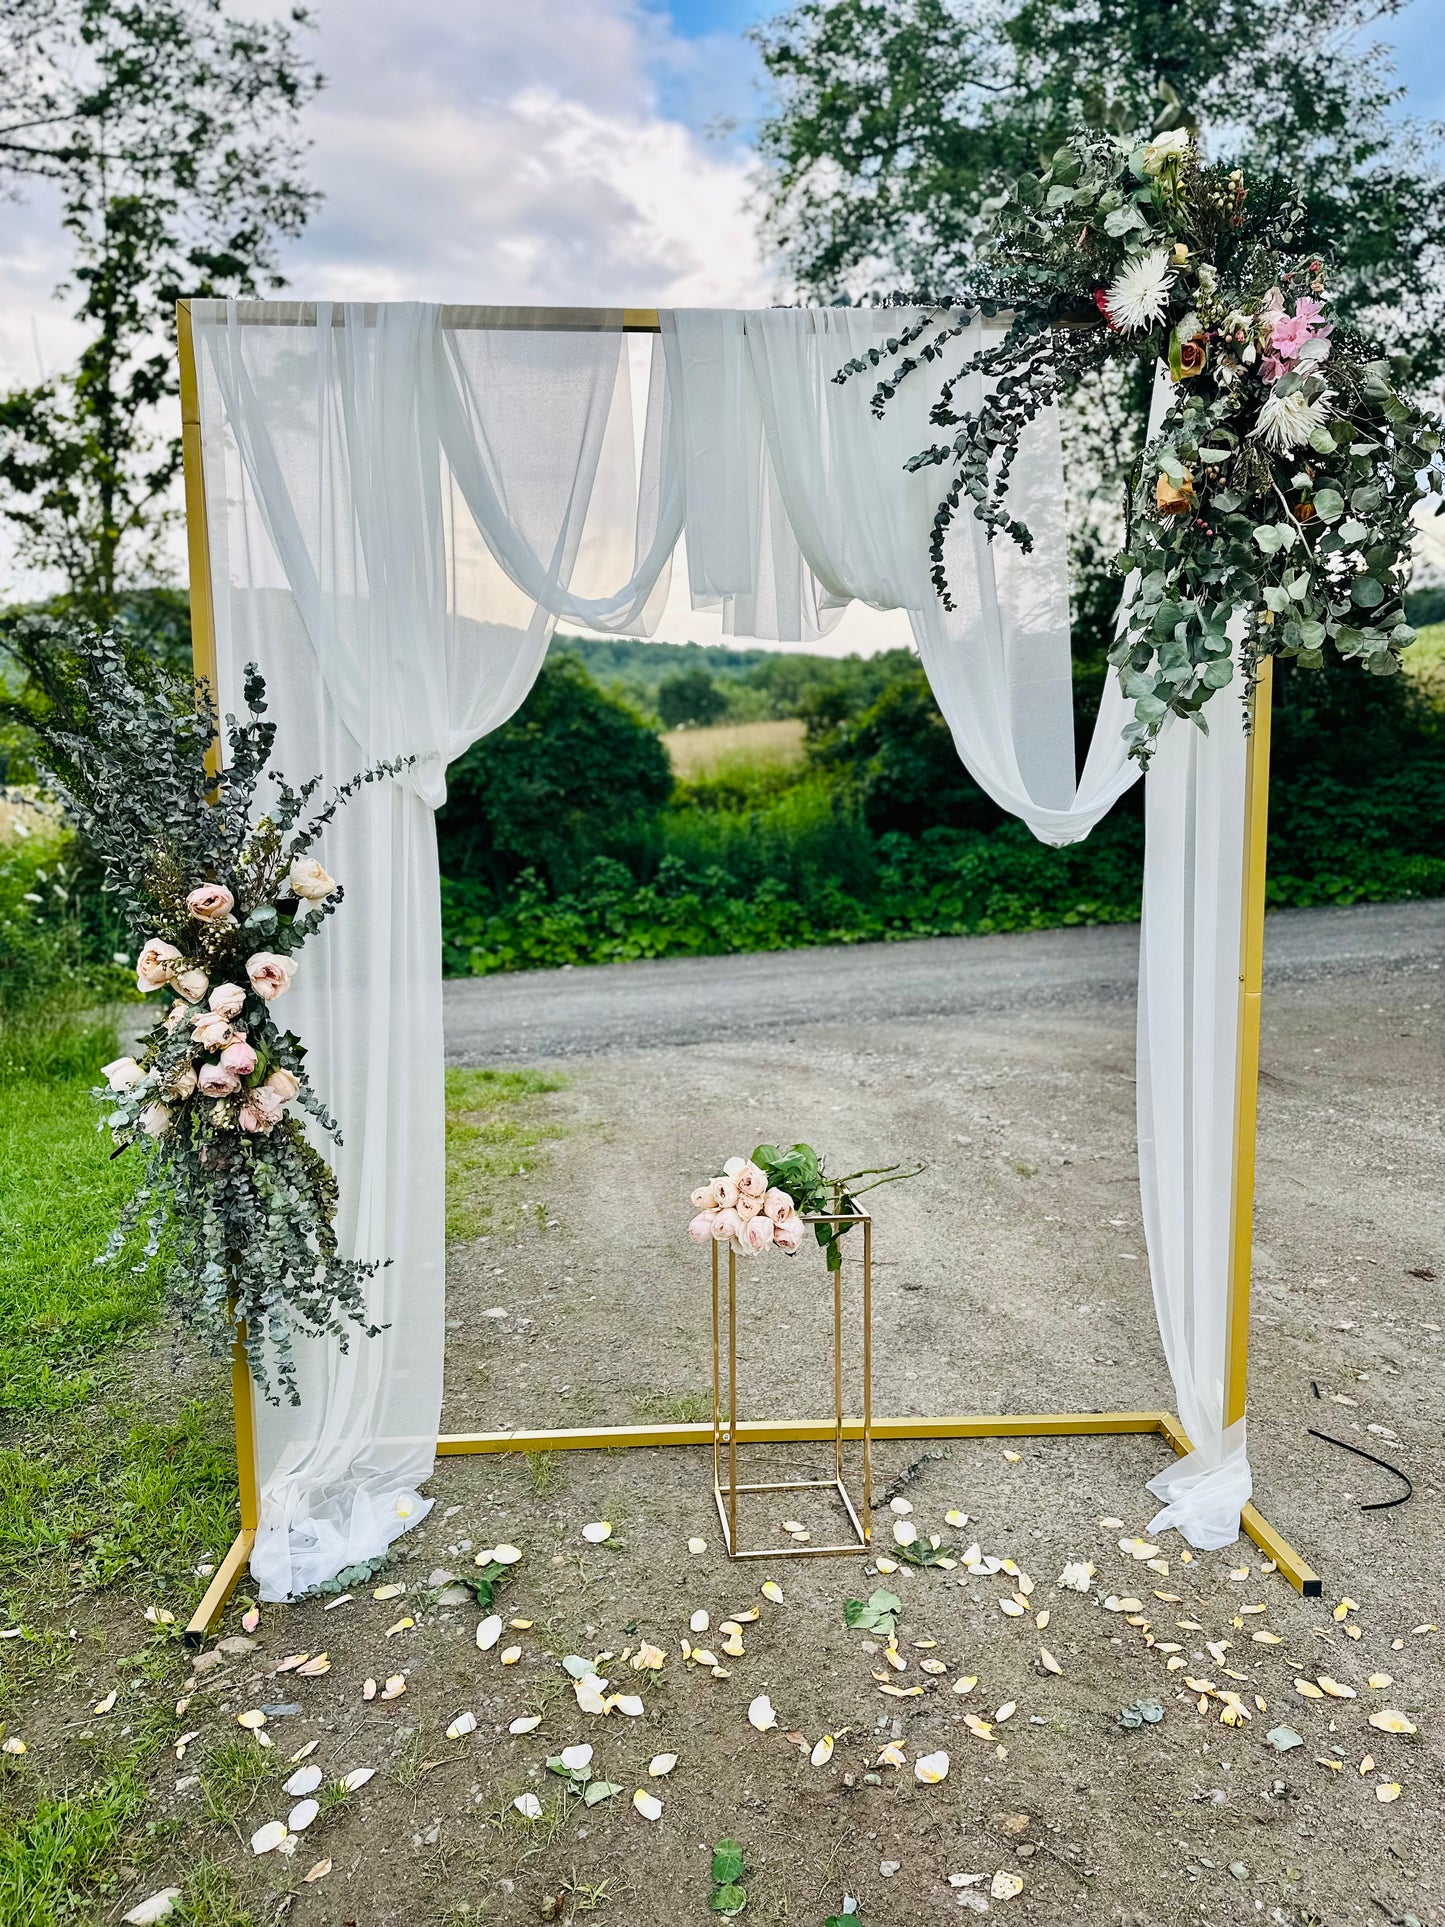 Rented Arbor and/or Chiffon Drape